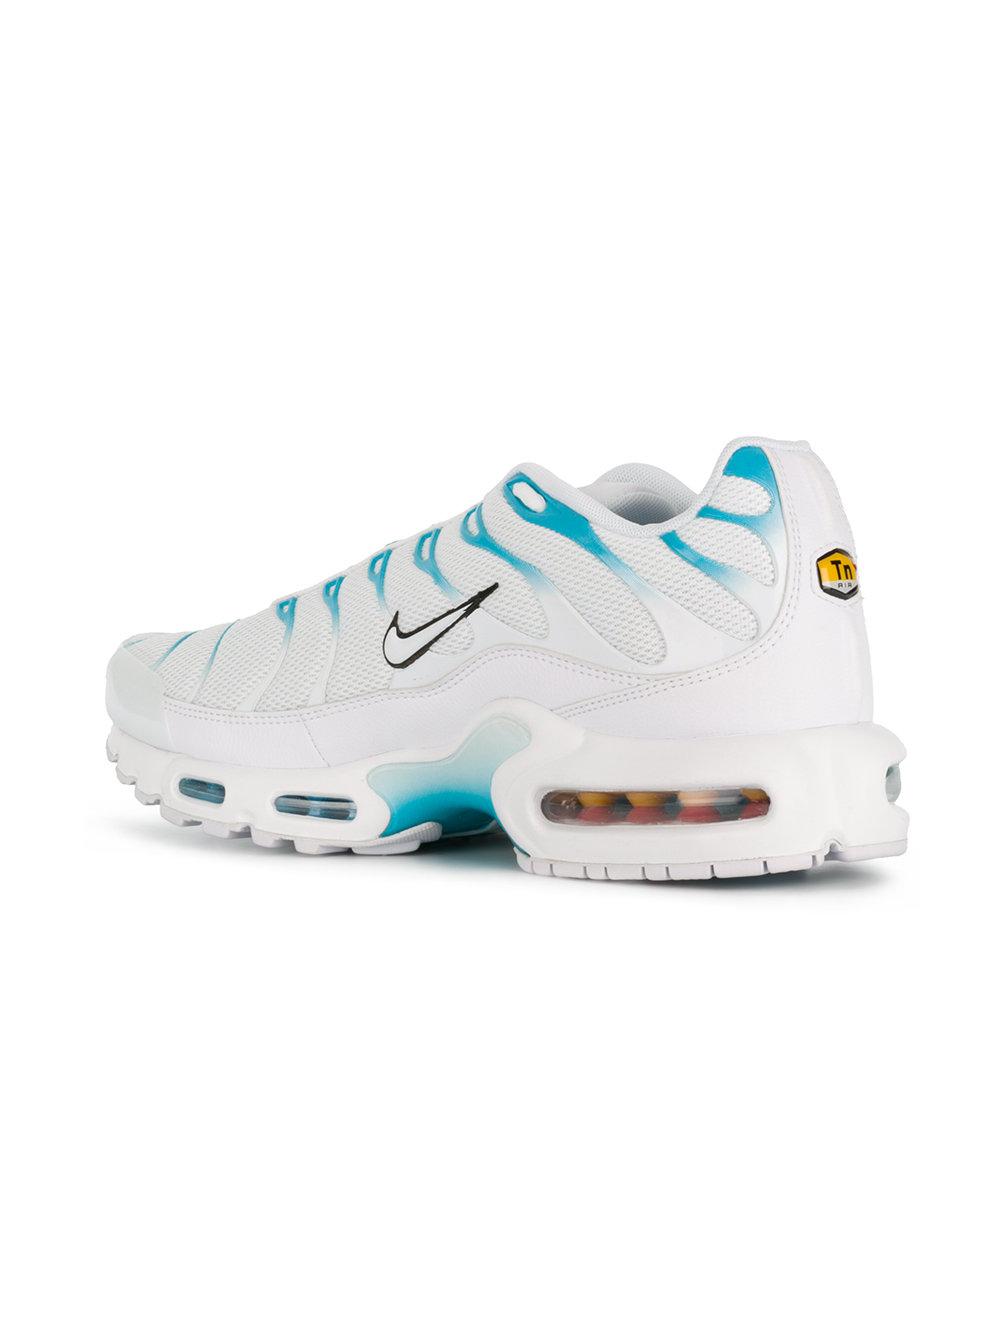 Nike Rubber Air Max Plus Tn 'blue Fury' Sneakers in White for Men - Lyst